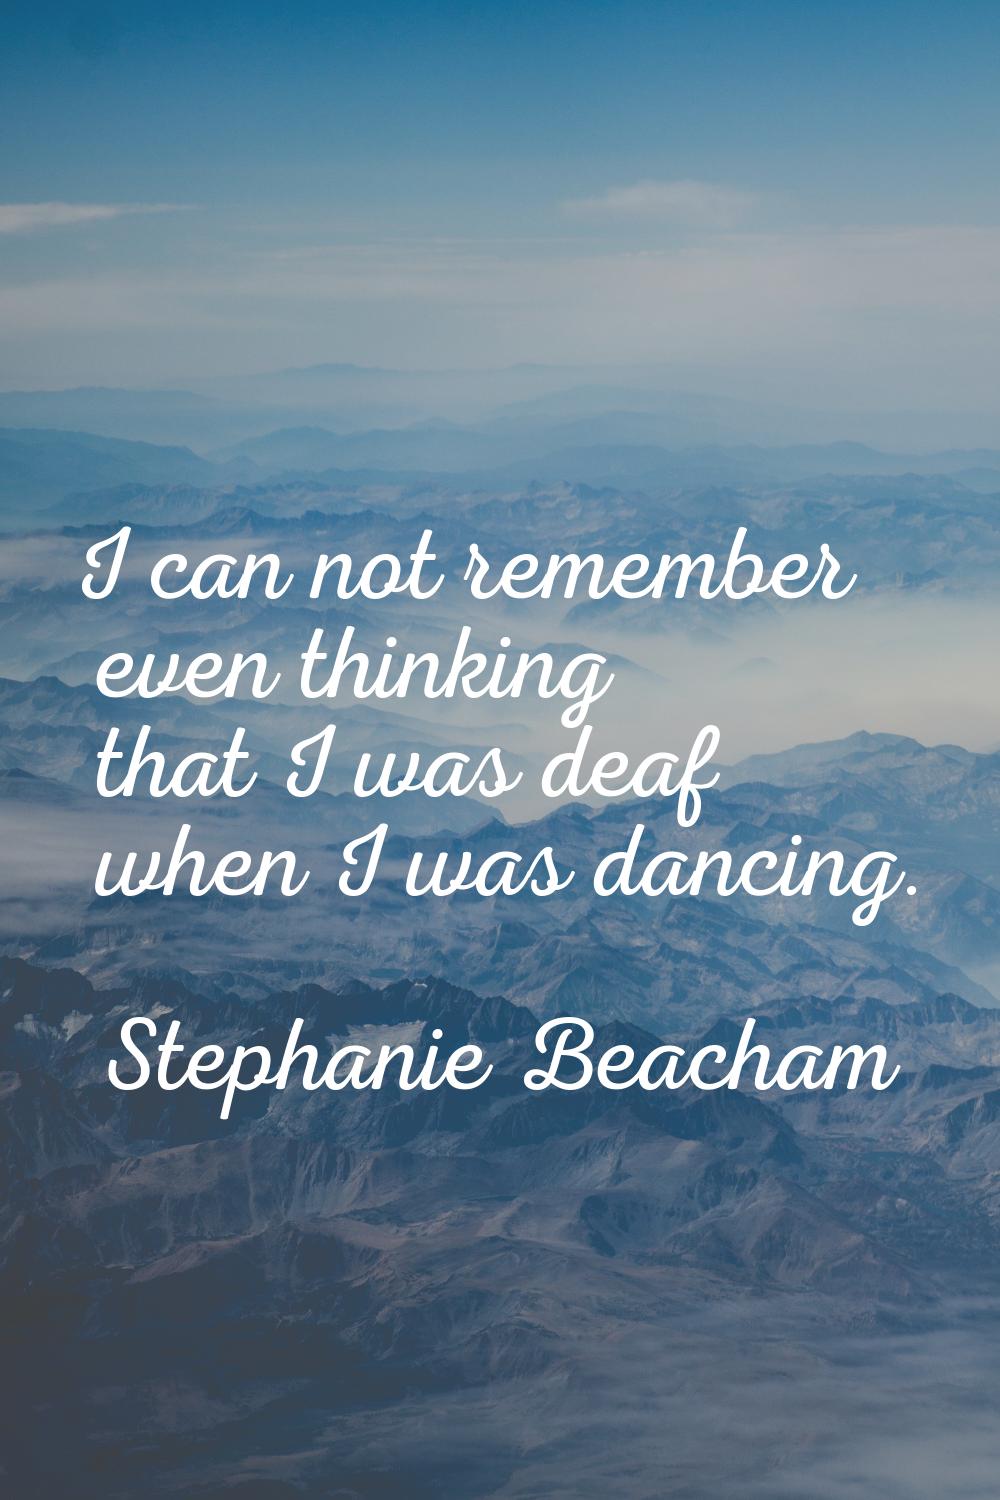 I can not remember even thinking that I was deaf when I was dancing.